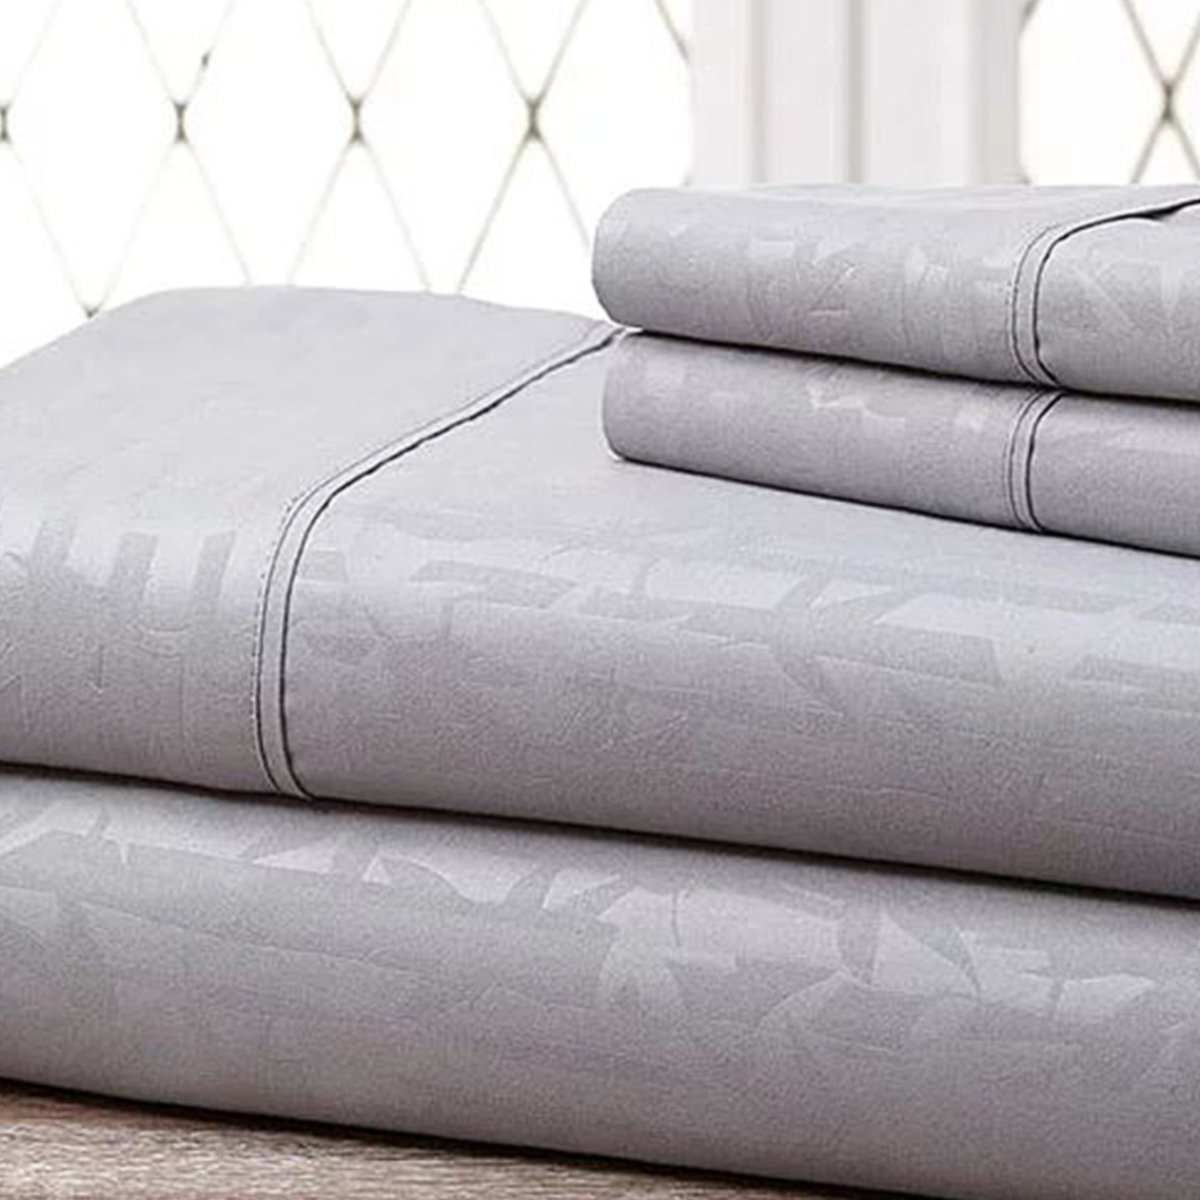 Hny-4pc-eb-gra-f Super-soft 1600 Series Bamboo Embossed Bed Sheet, Gray - Full, 4 Piece